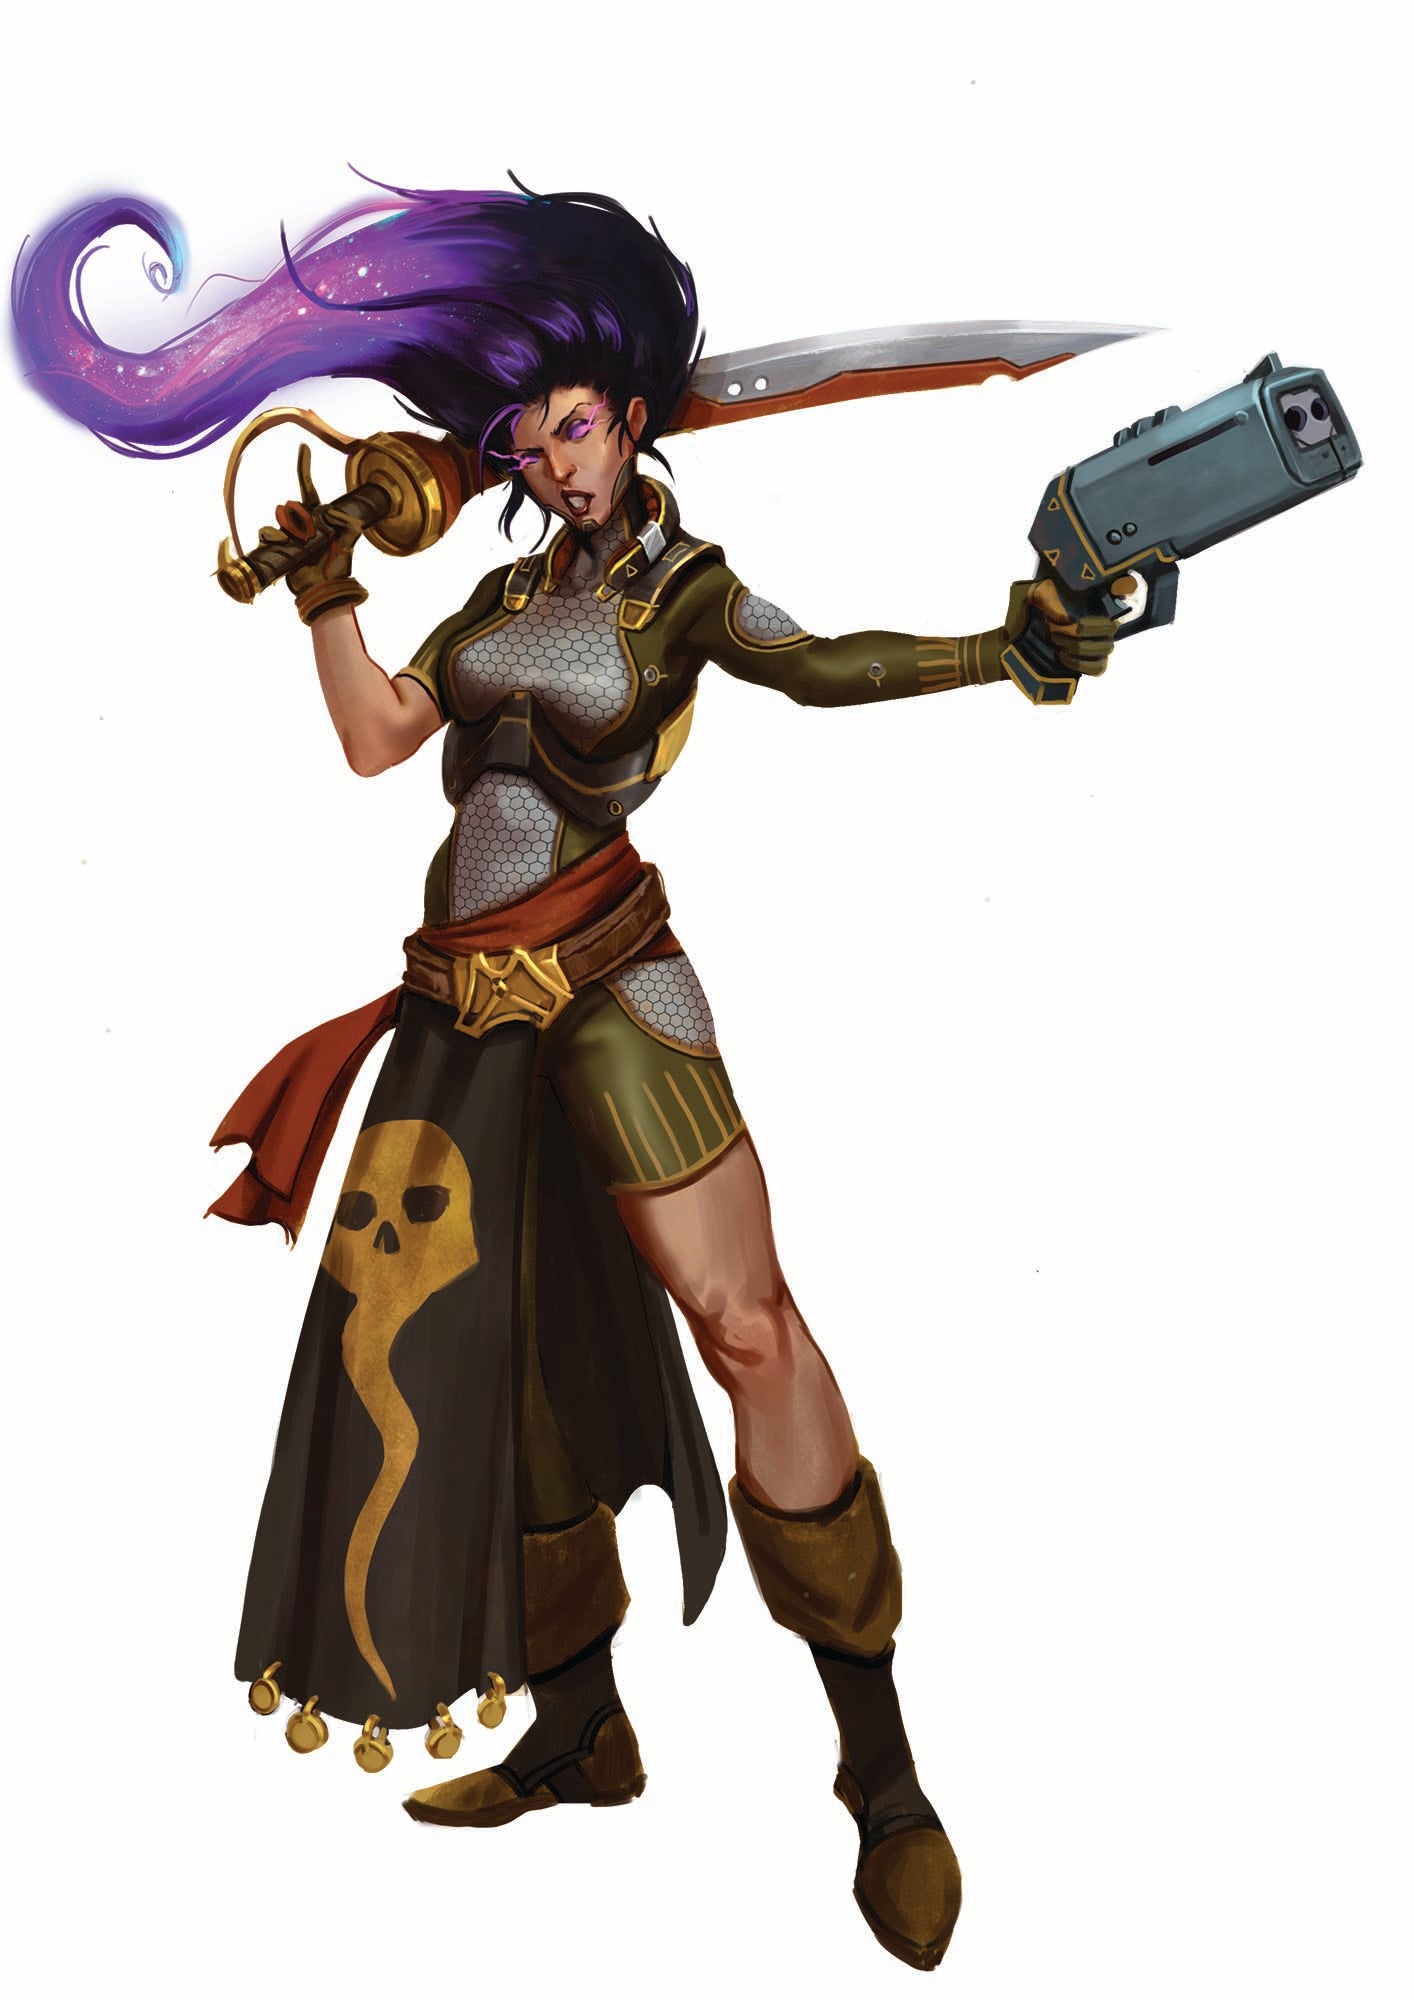 Besmara the chaotic neutral goddess of piracy, space monsters, and strife. Standing with a gun in one hand and a sword over her shoulder